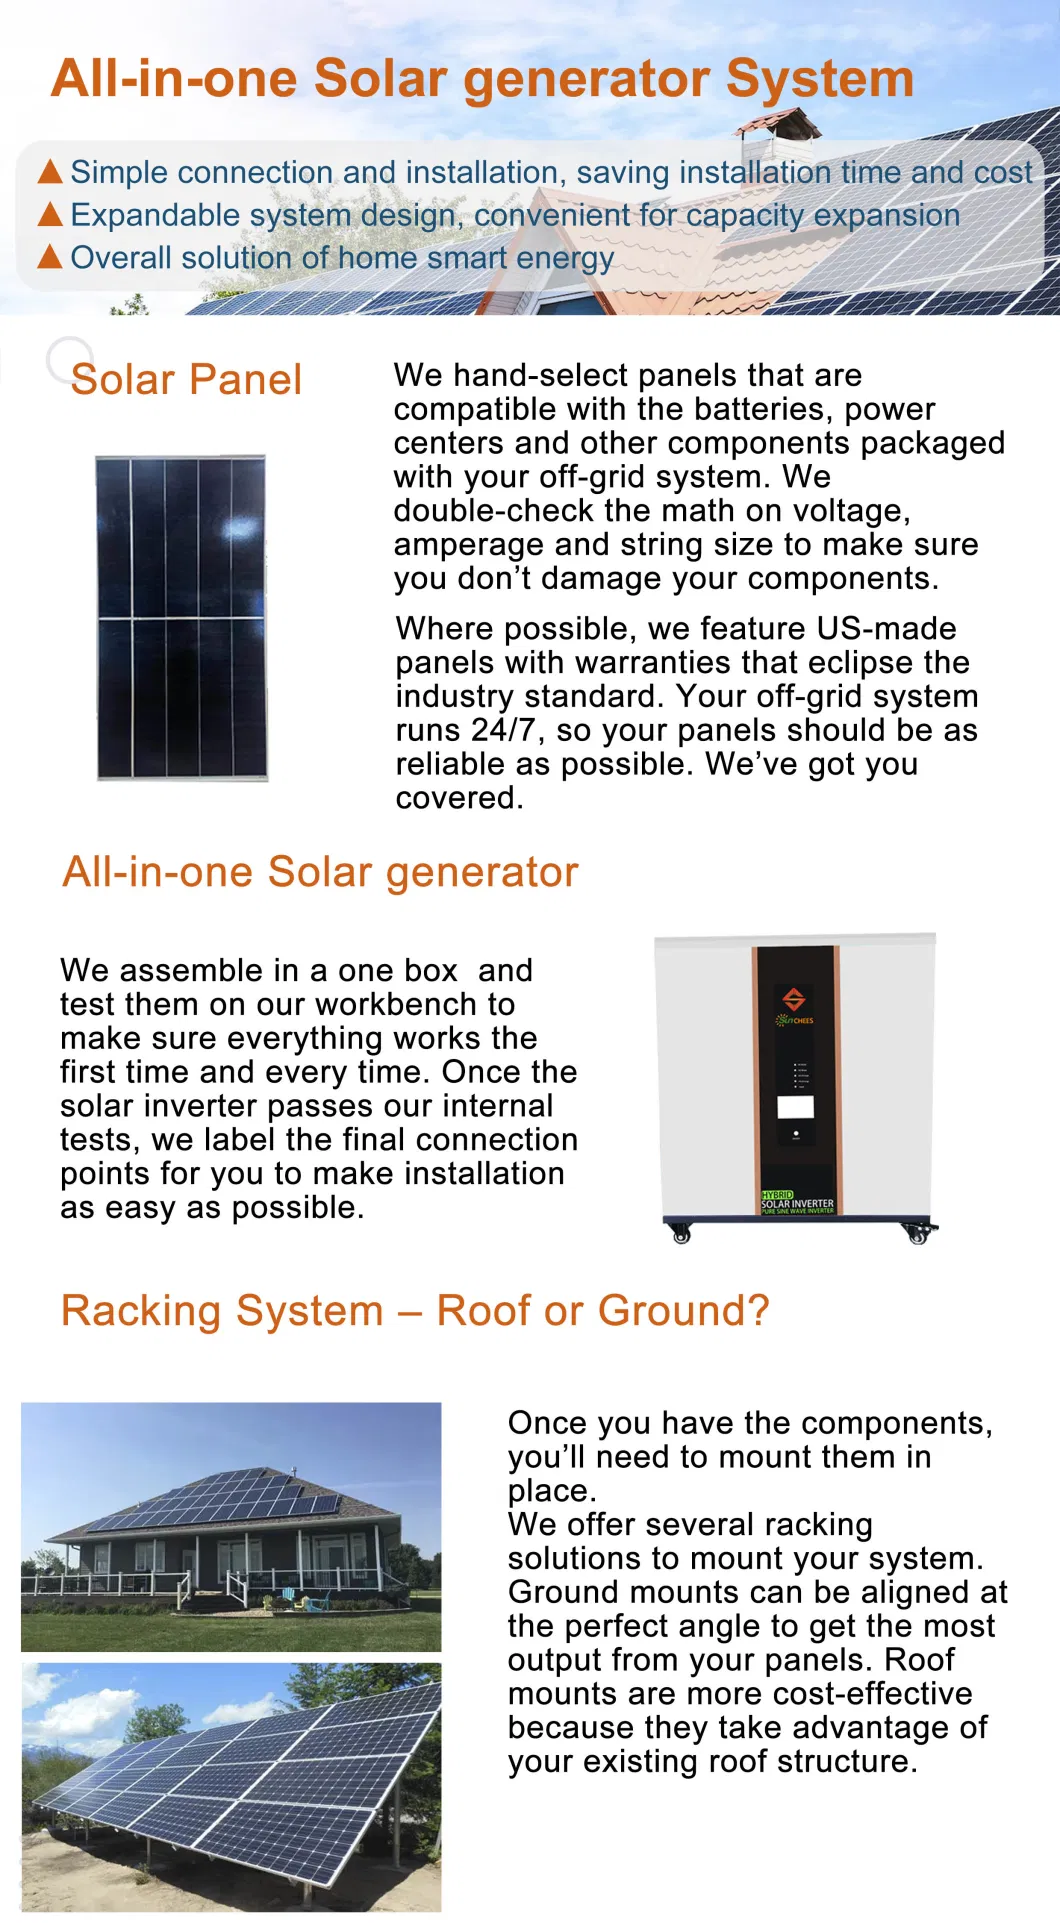 1kw to 5kw All in One Solar Kits, Solar Energy System for Home Use